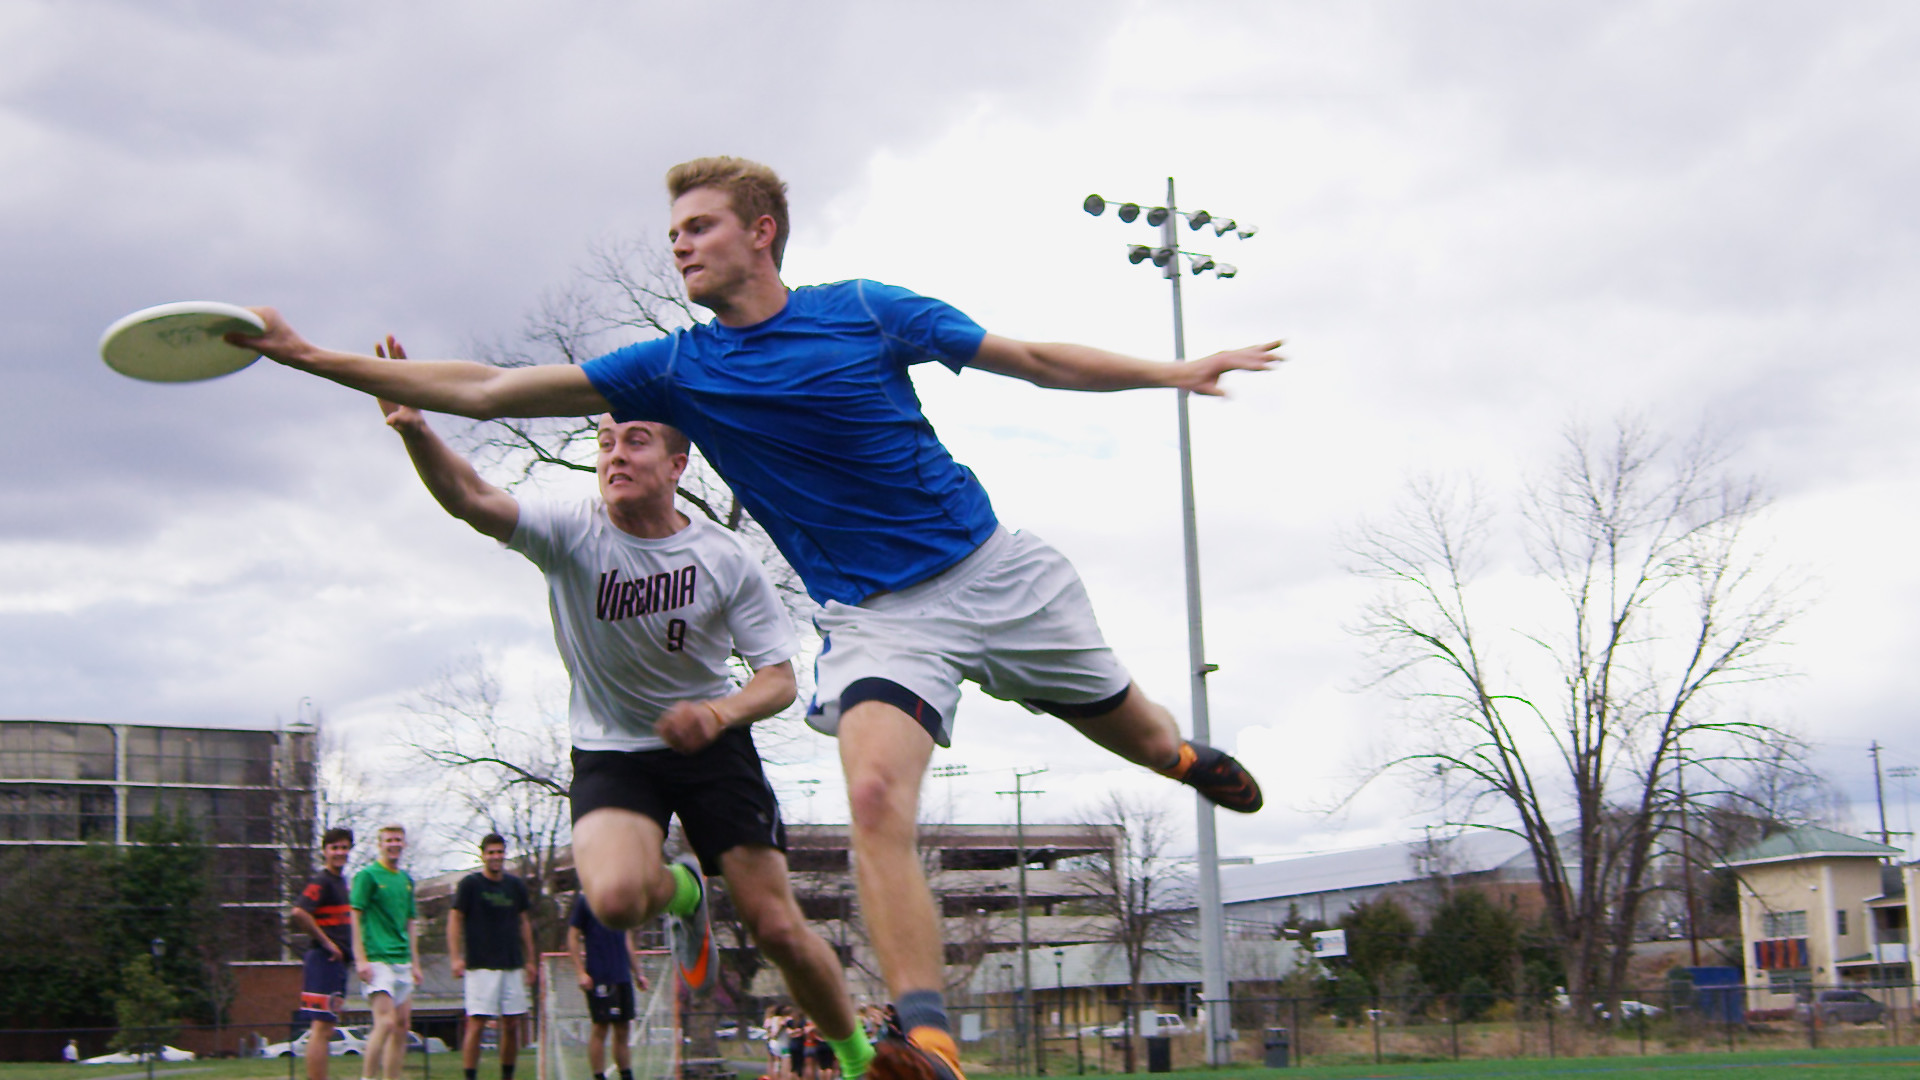 two people playing ultimate frisbee. One player tries to knock the frisbee out of their hand